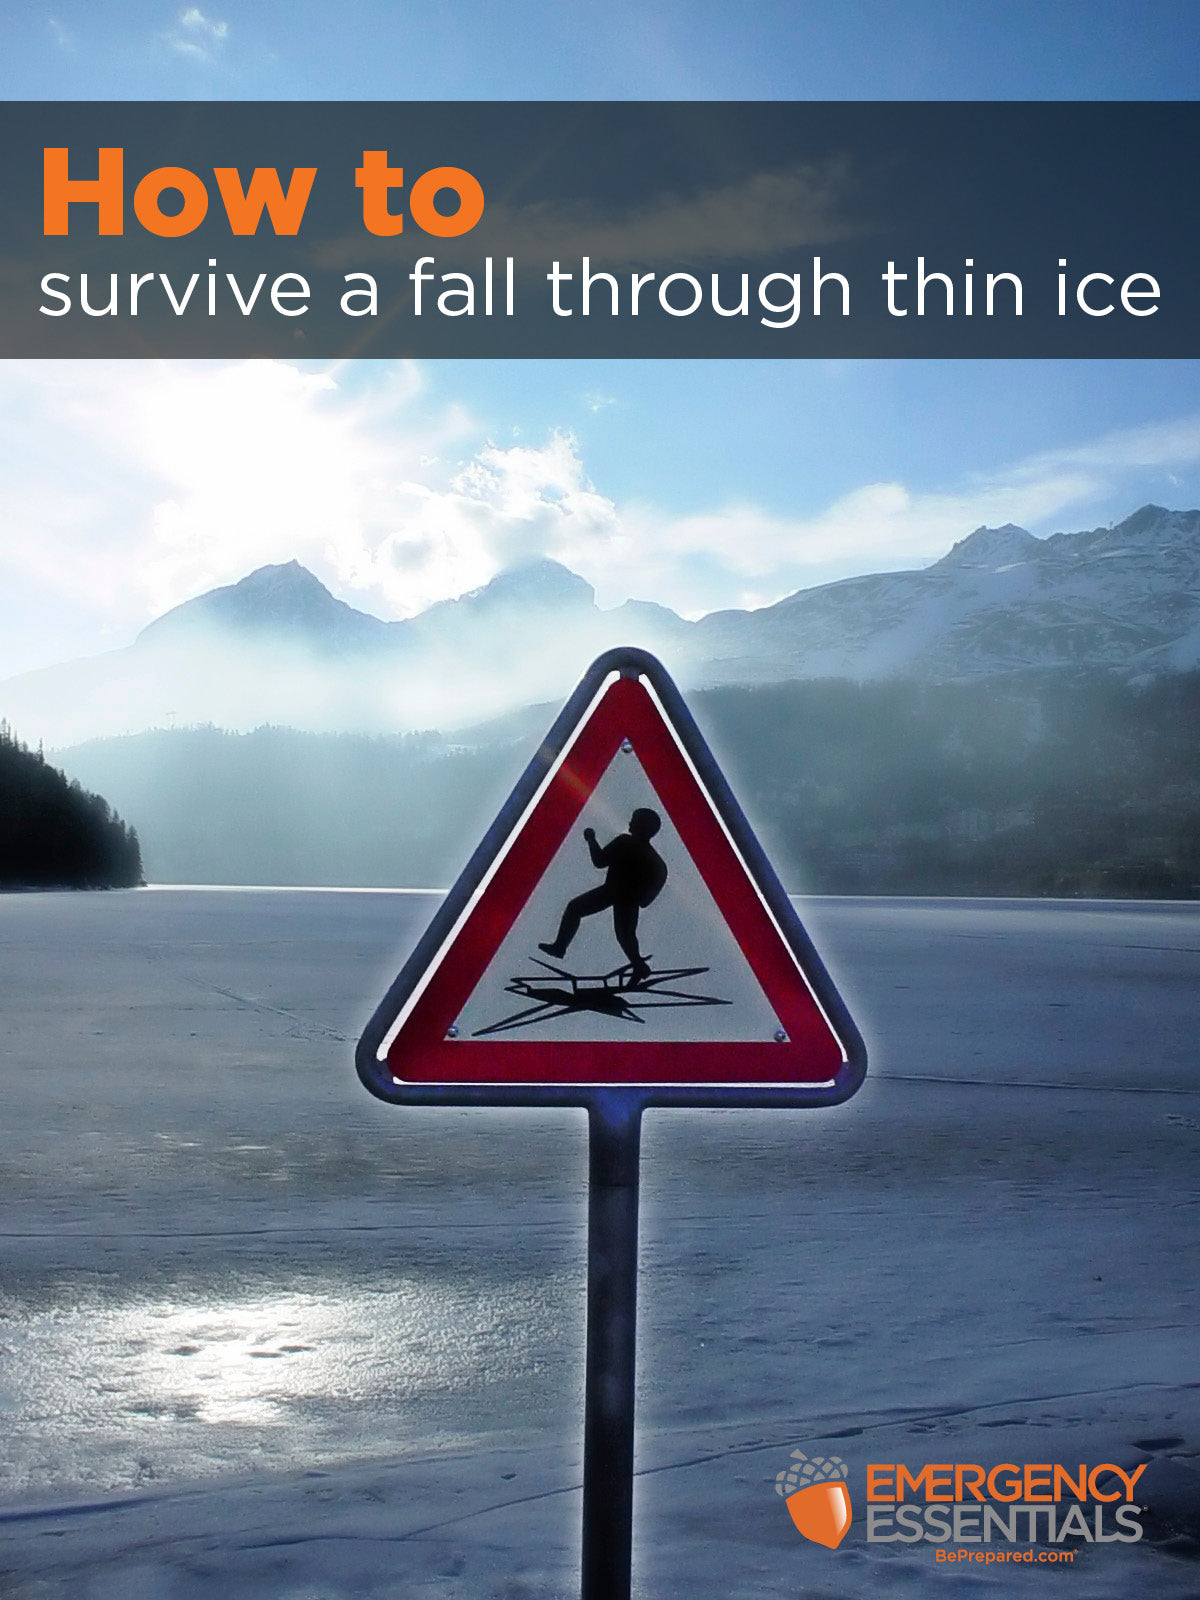 How to Survive a Fall Through Thin Ice